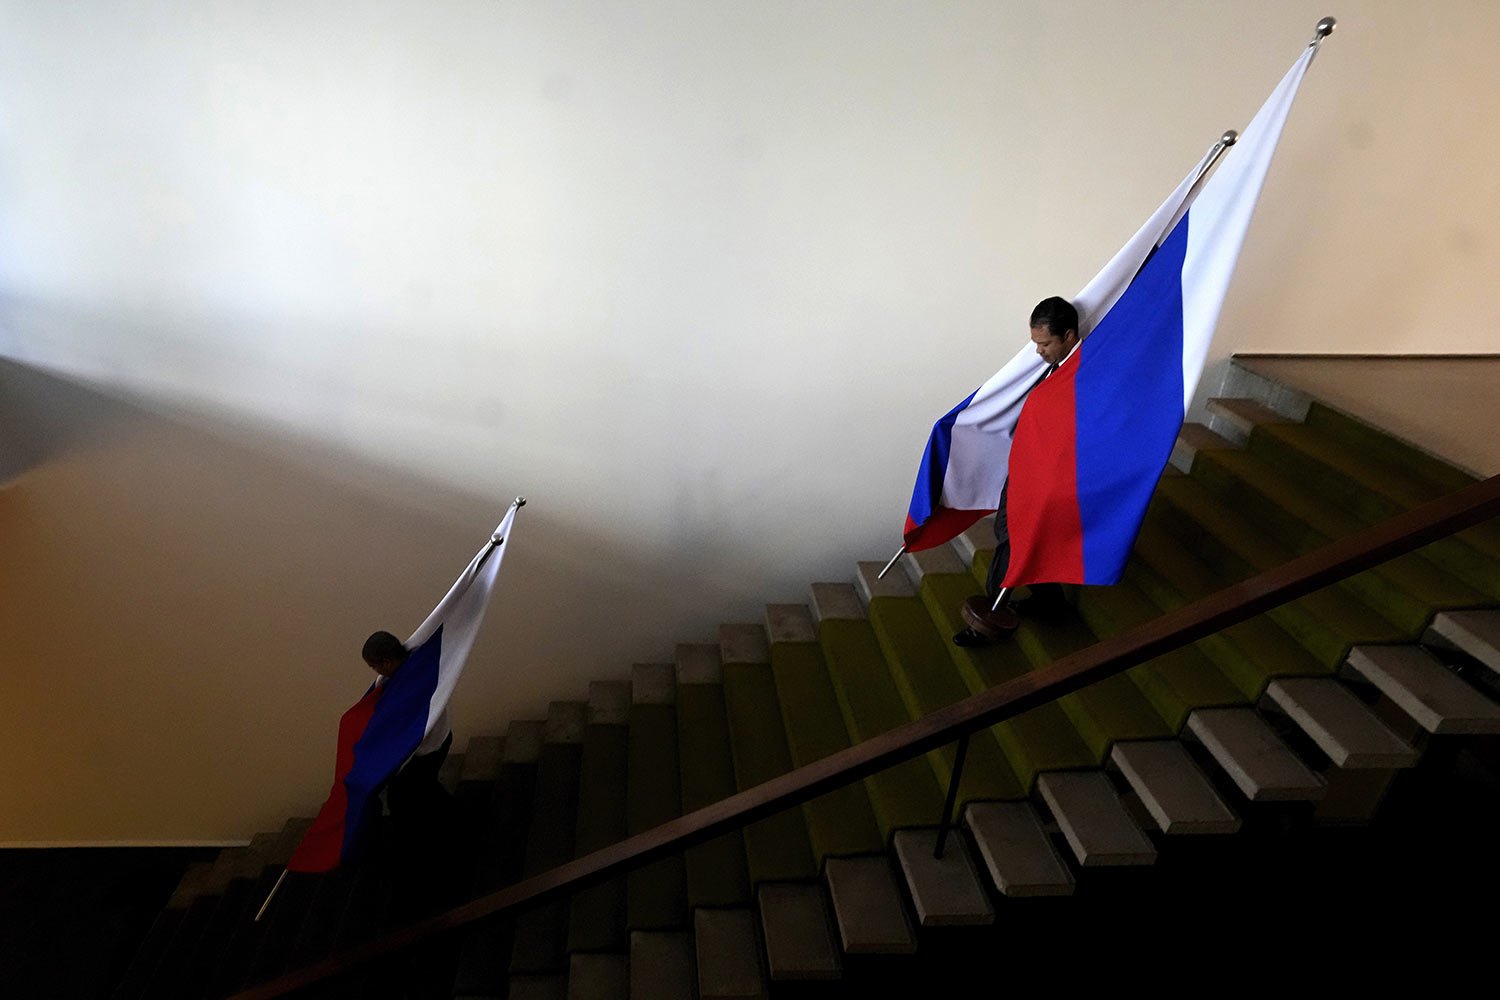  Itamaraty Palace workers carry Russian flags as they prep for the arrival of Russian Foreign Minister Sergey Lavrov in Brasilia, Brazil, April 17, 2023. (AP Photo/Eraldo Peres) 